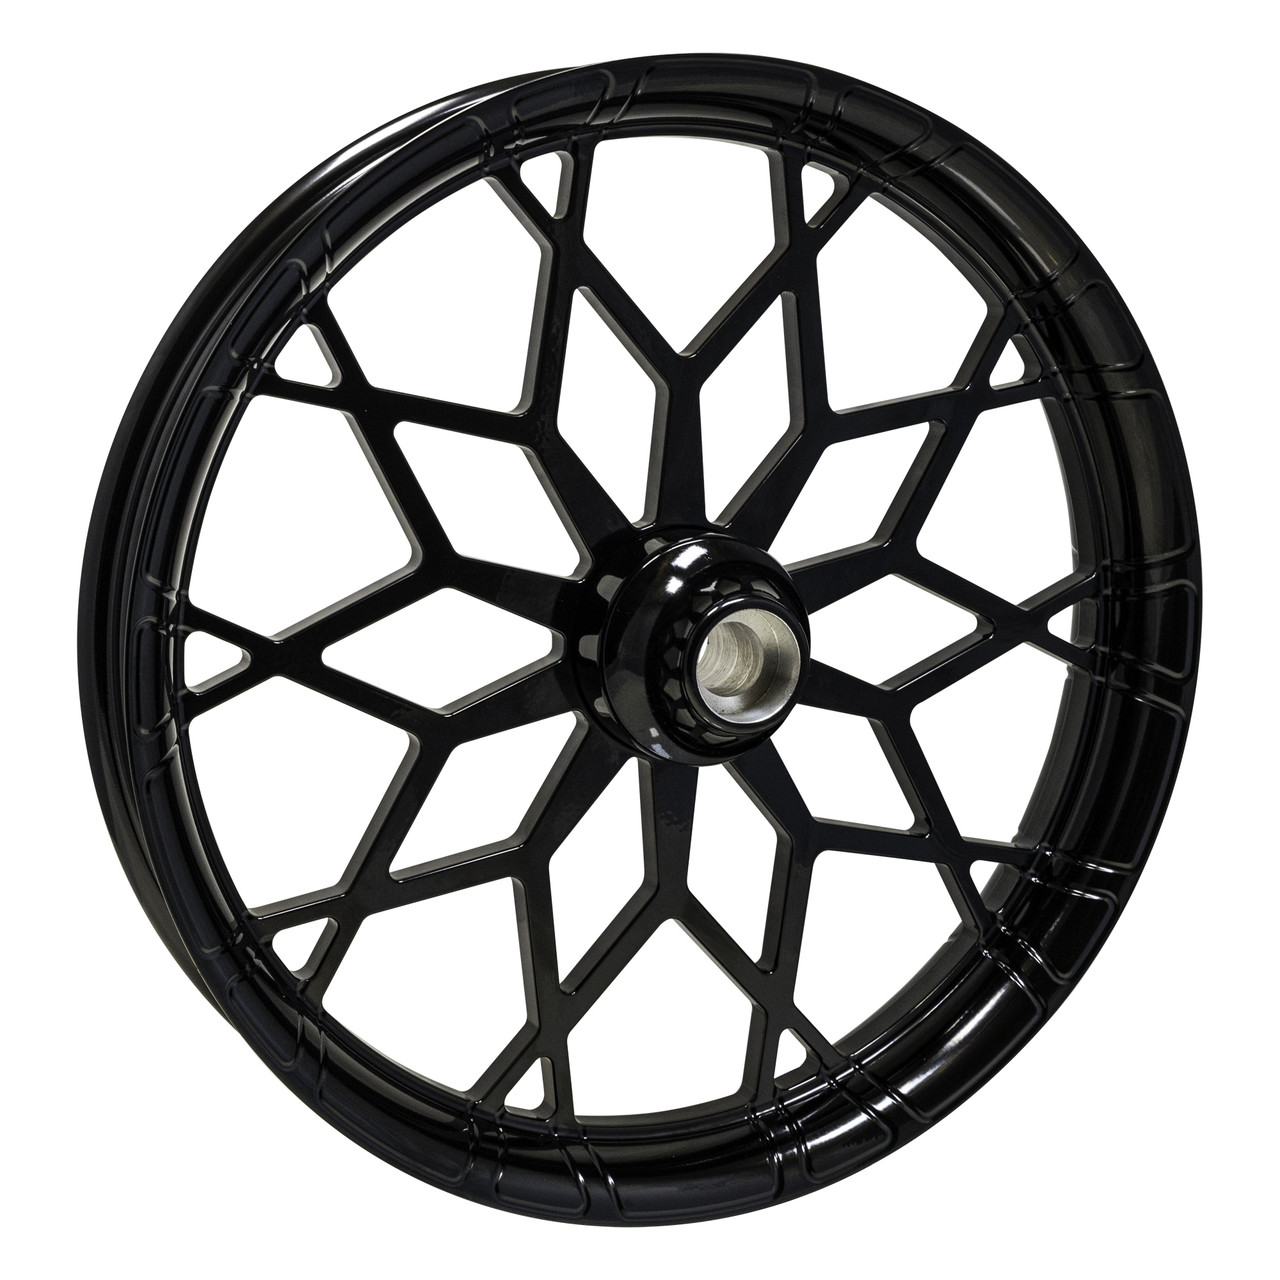 Prodigy 18 inch fat front Harley Wheels